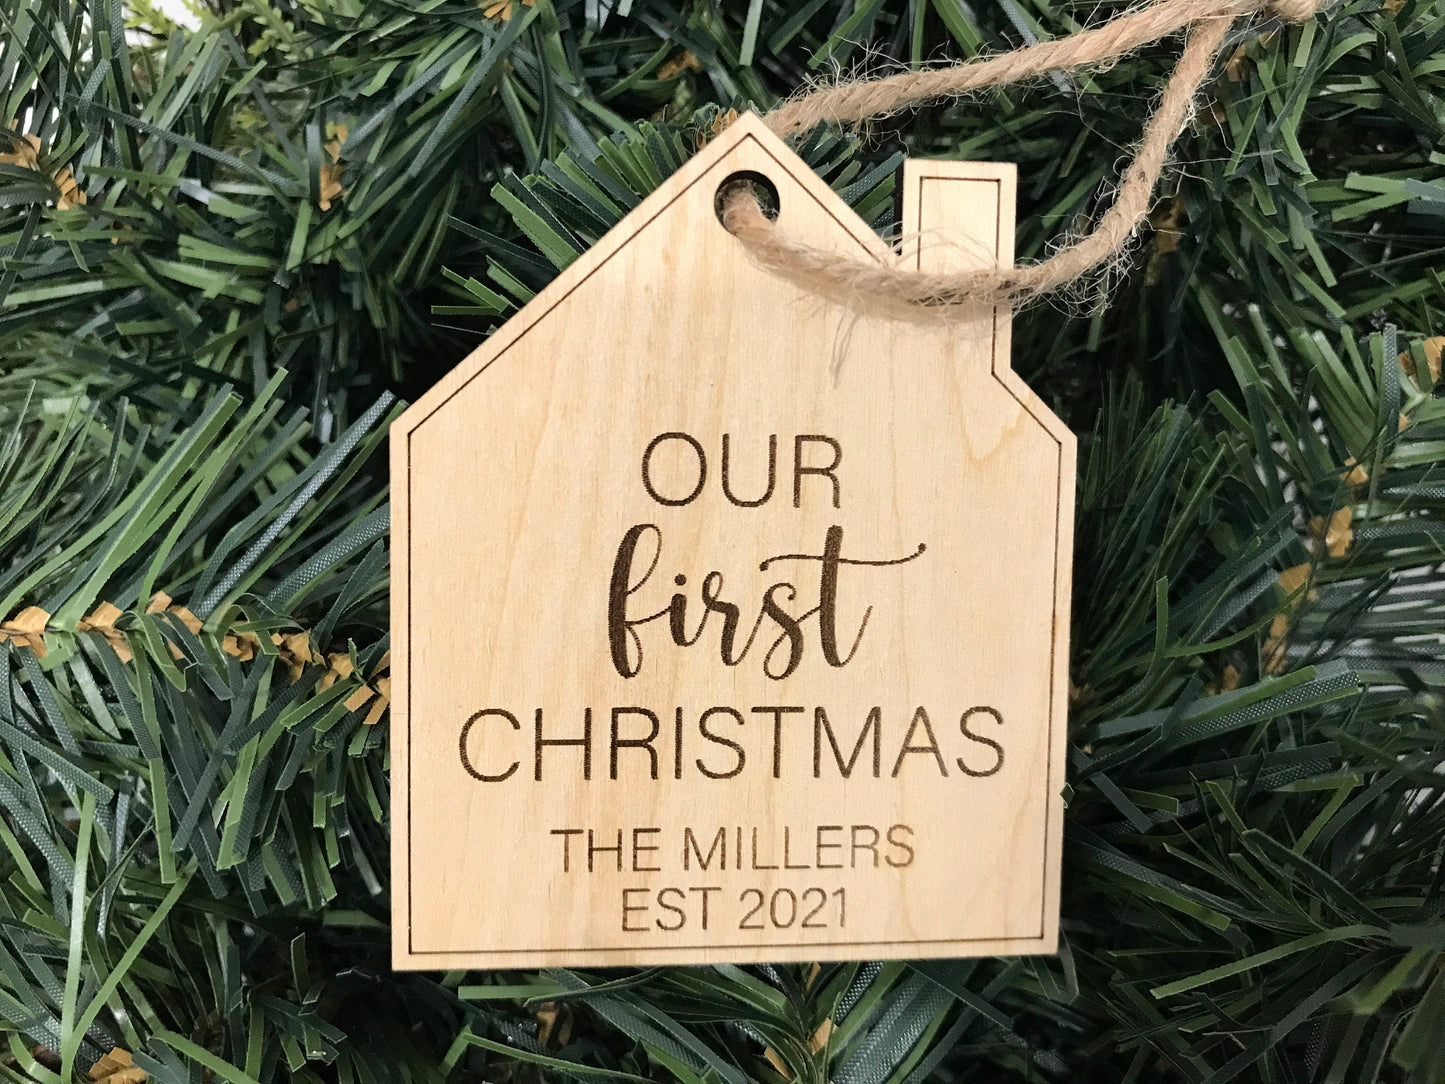 our first house ornament - christmas ornament ideas for new home buyers 